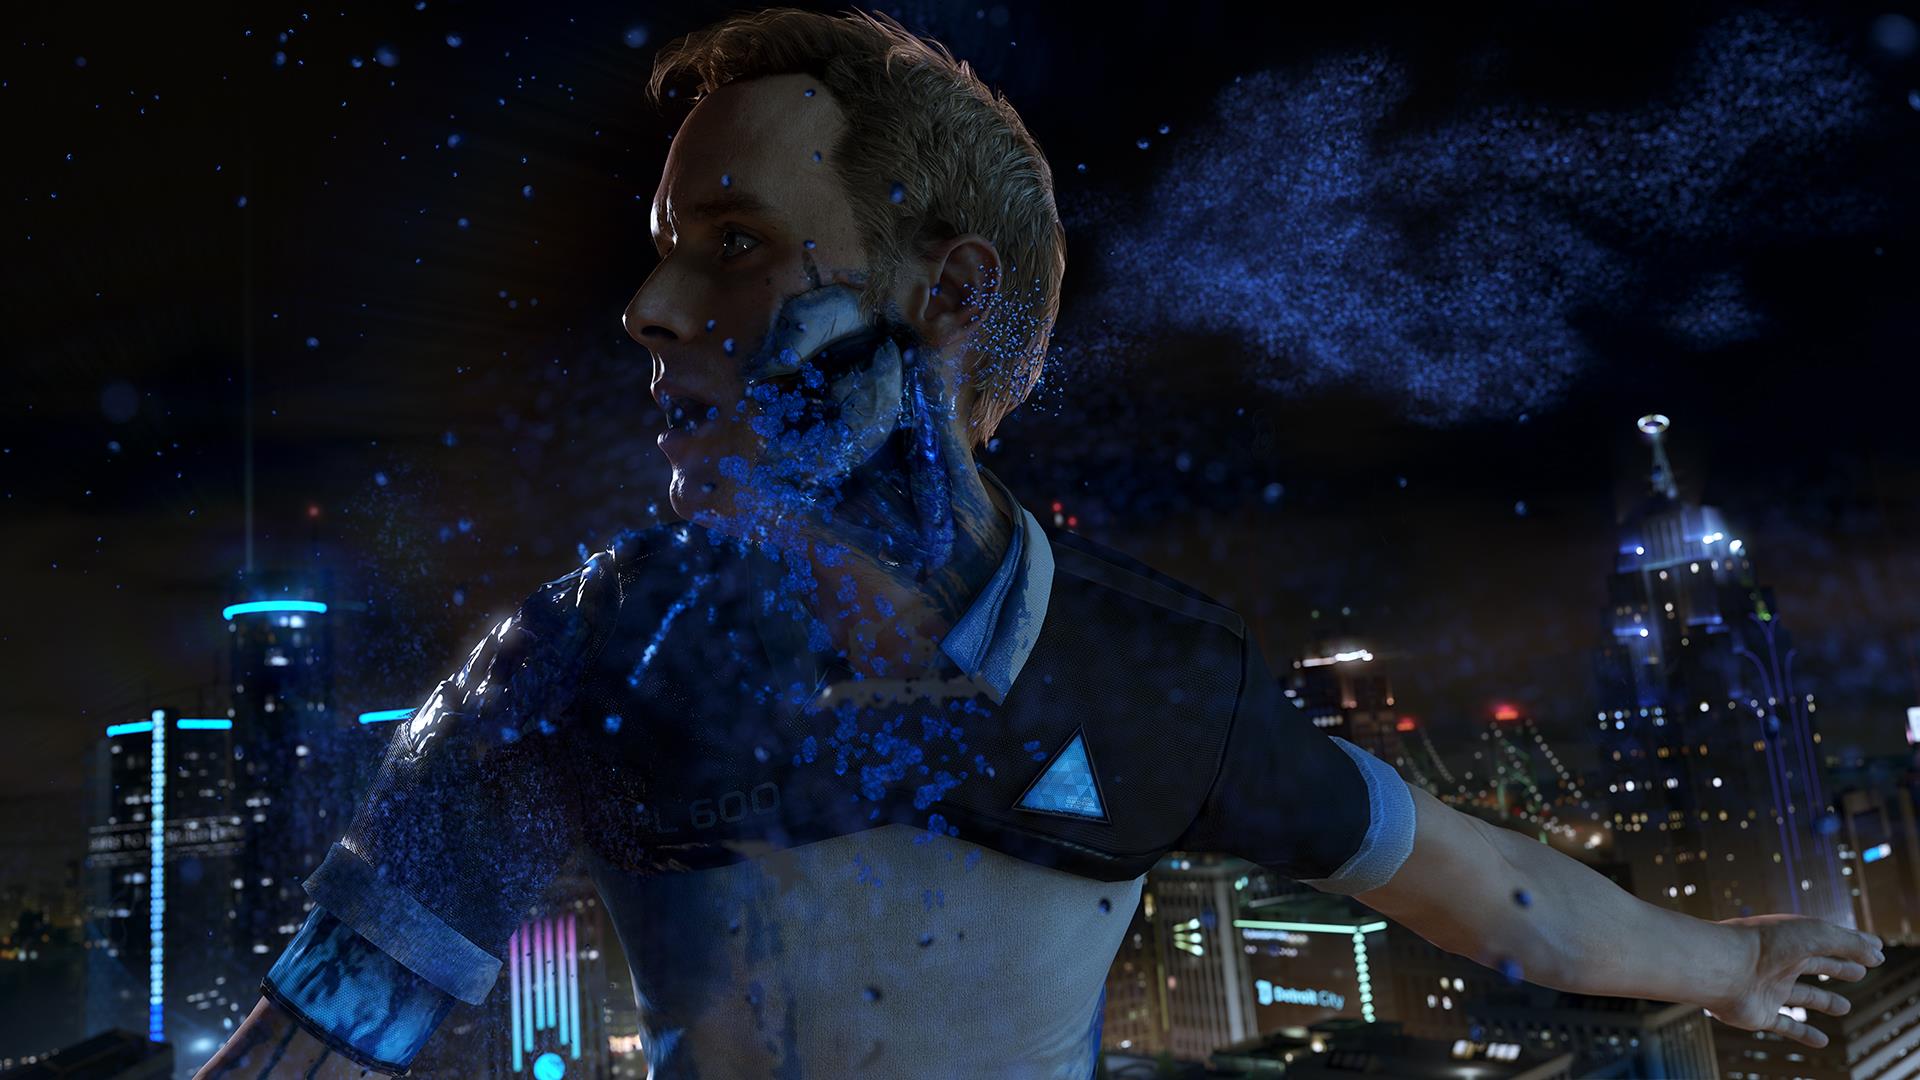 This new demo for Detroit: Become Human takes us deeper into the robot VG247